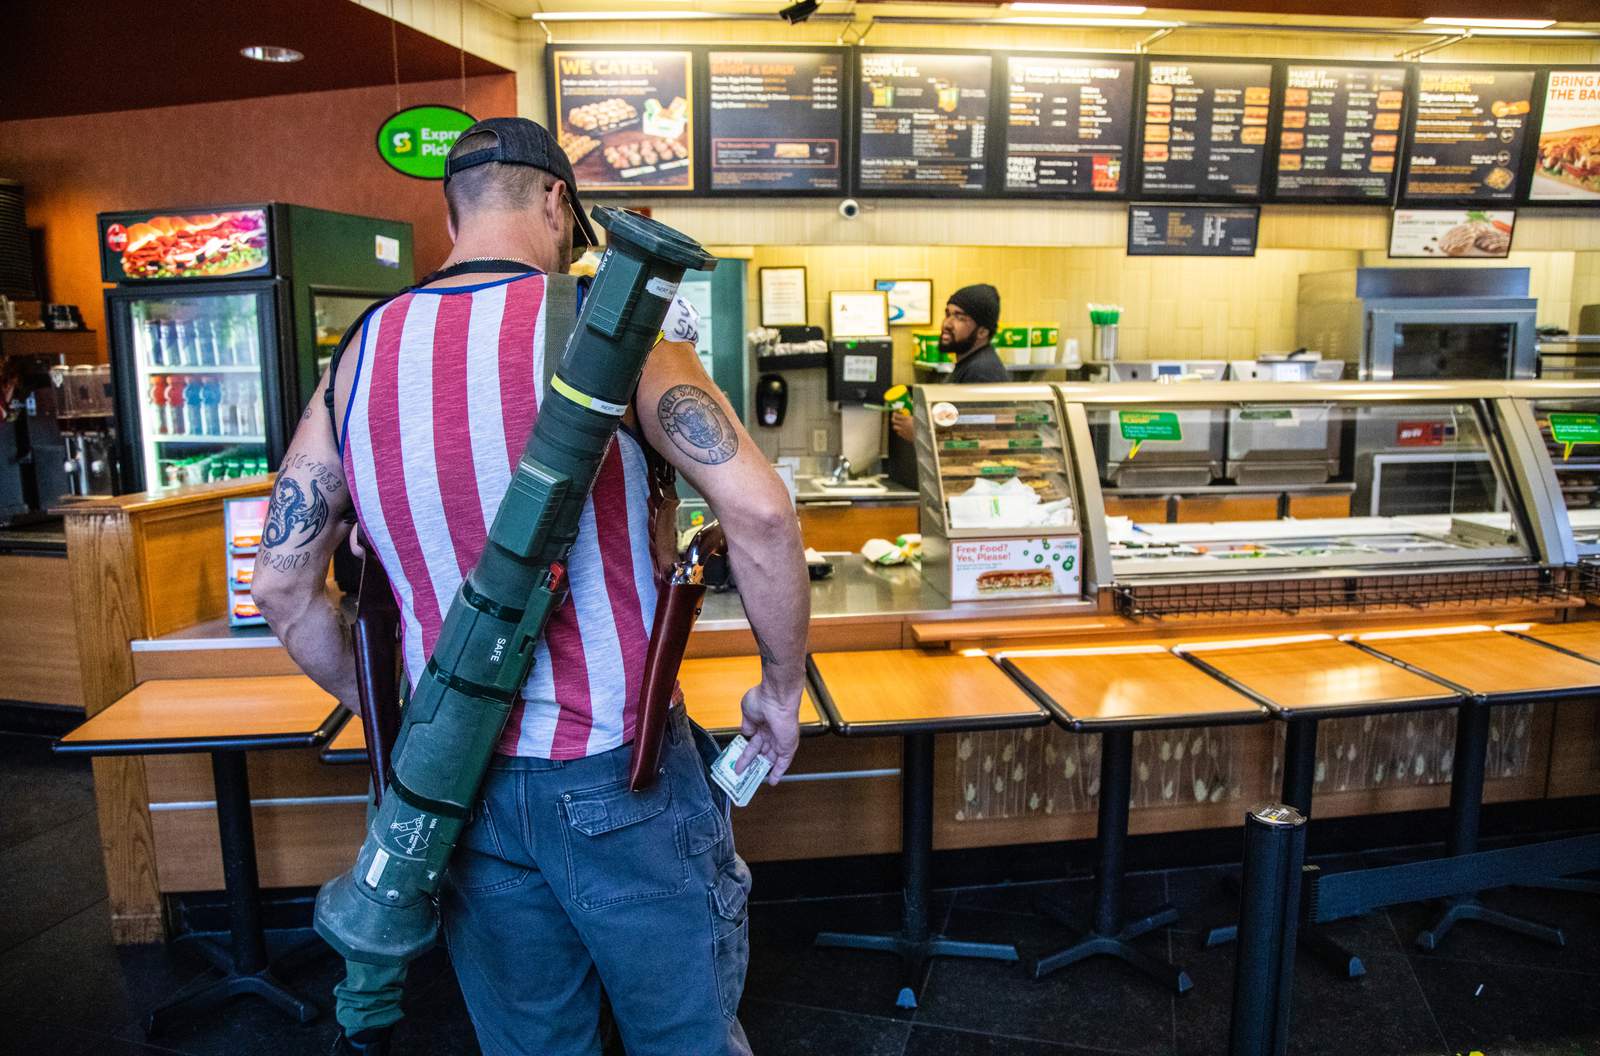 Photos of protesters carrying a rocket launcher, shotguns, and pistols while at a Subway restaurant go viral